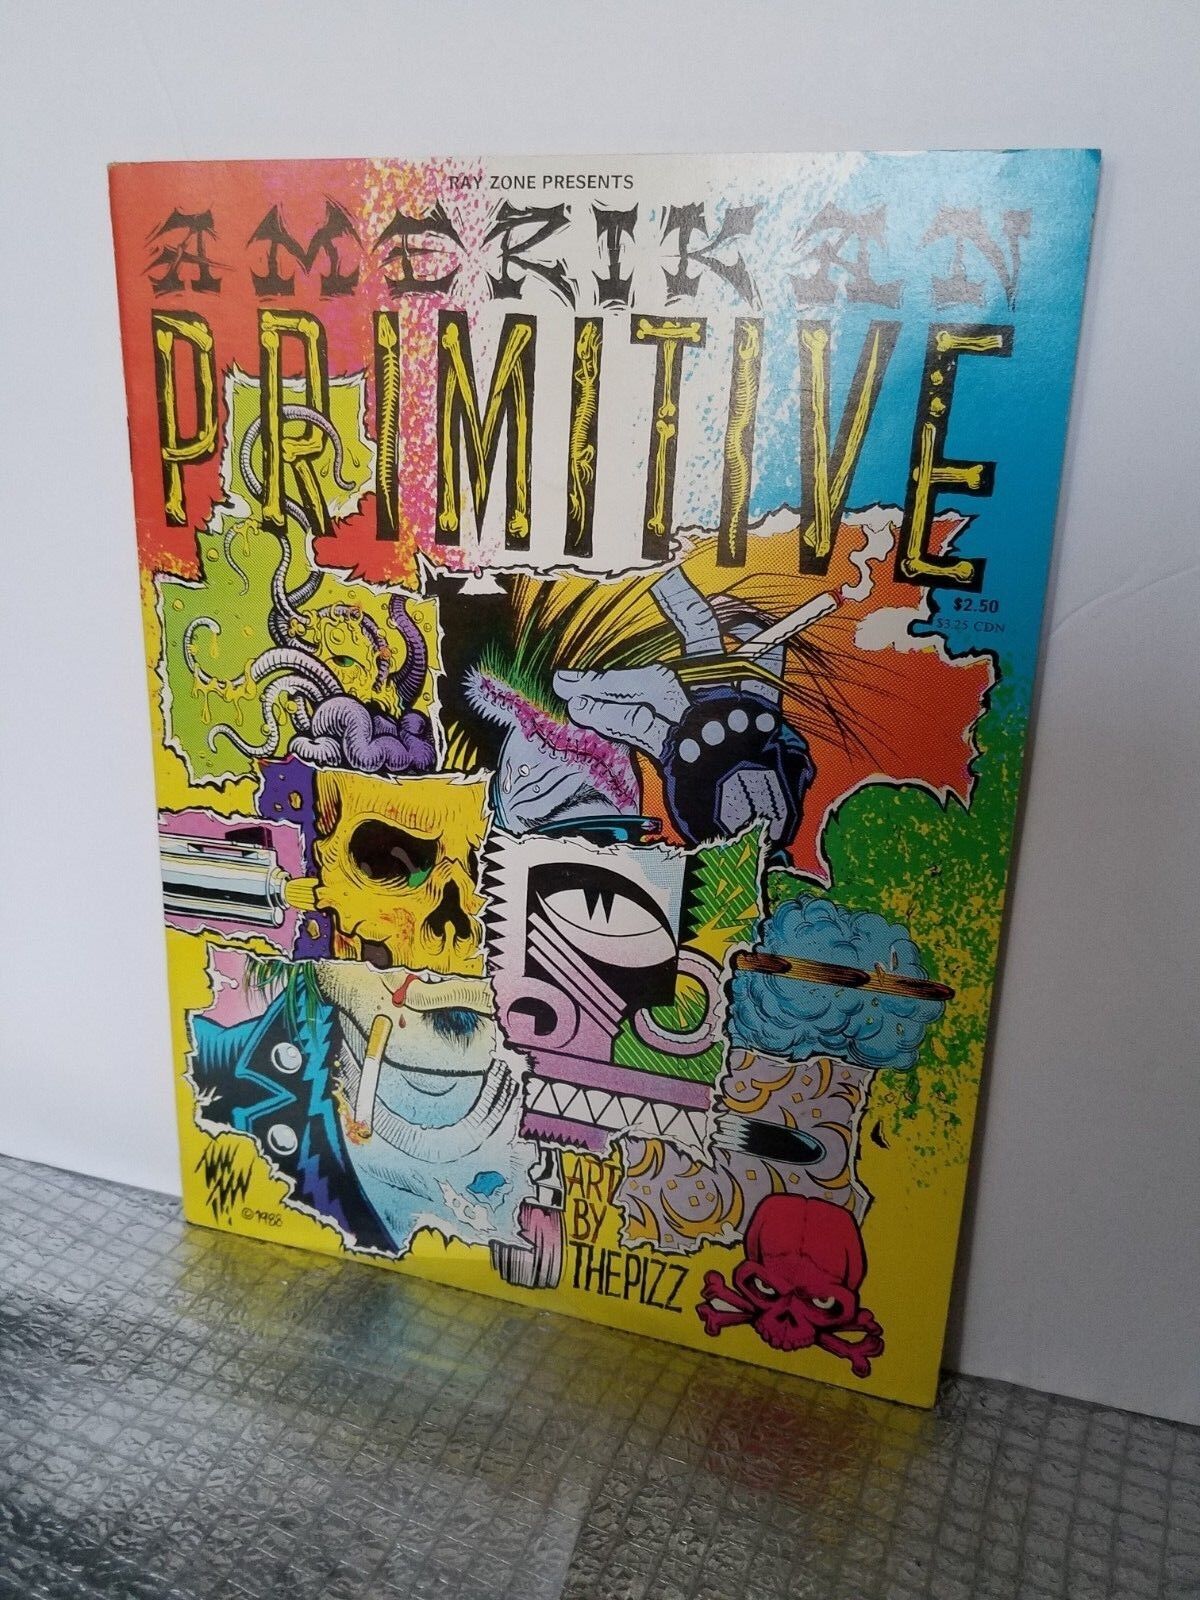 AMERIKAN PRIMITIVE #1 BY THE PIZZ. 1989 RAY ZONE PRESENTS 3-D ZONE. 1st ED. BOOK